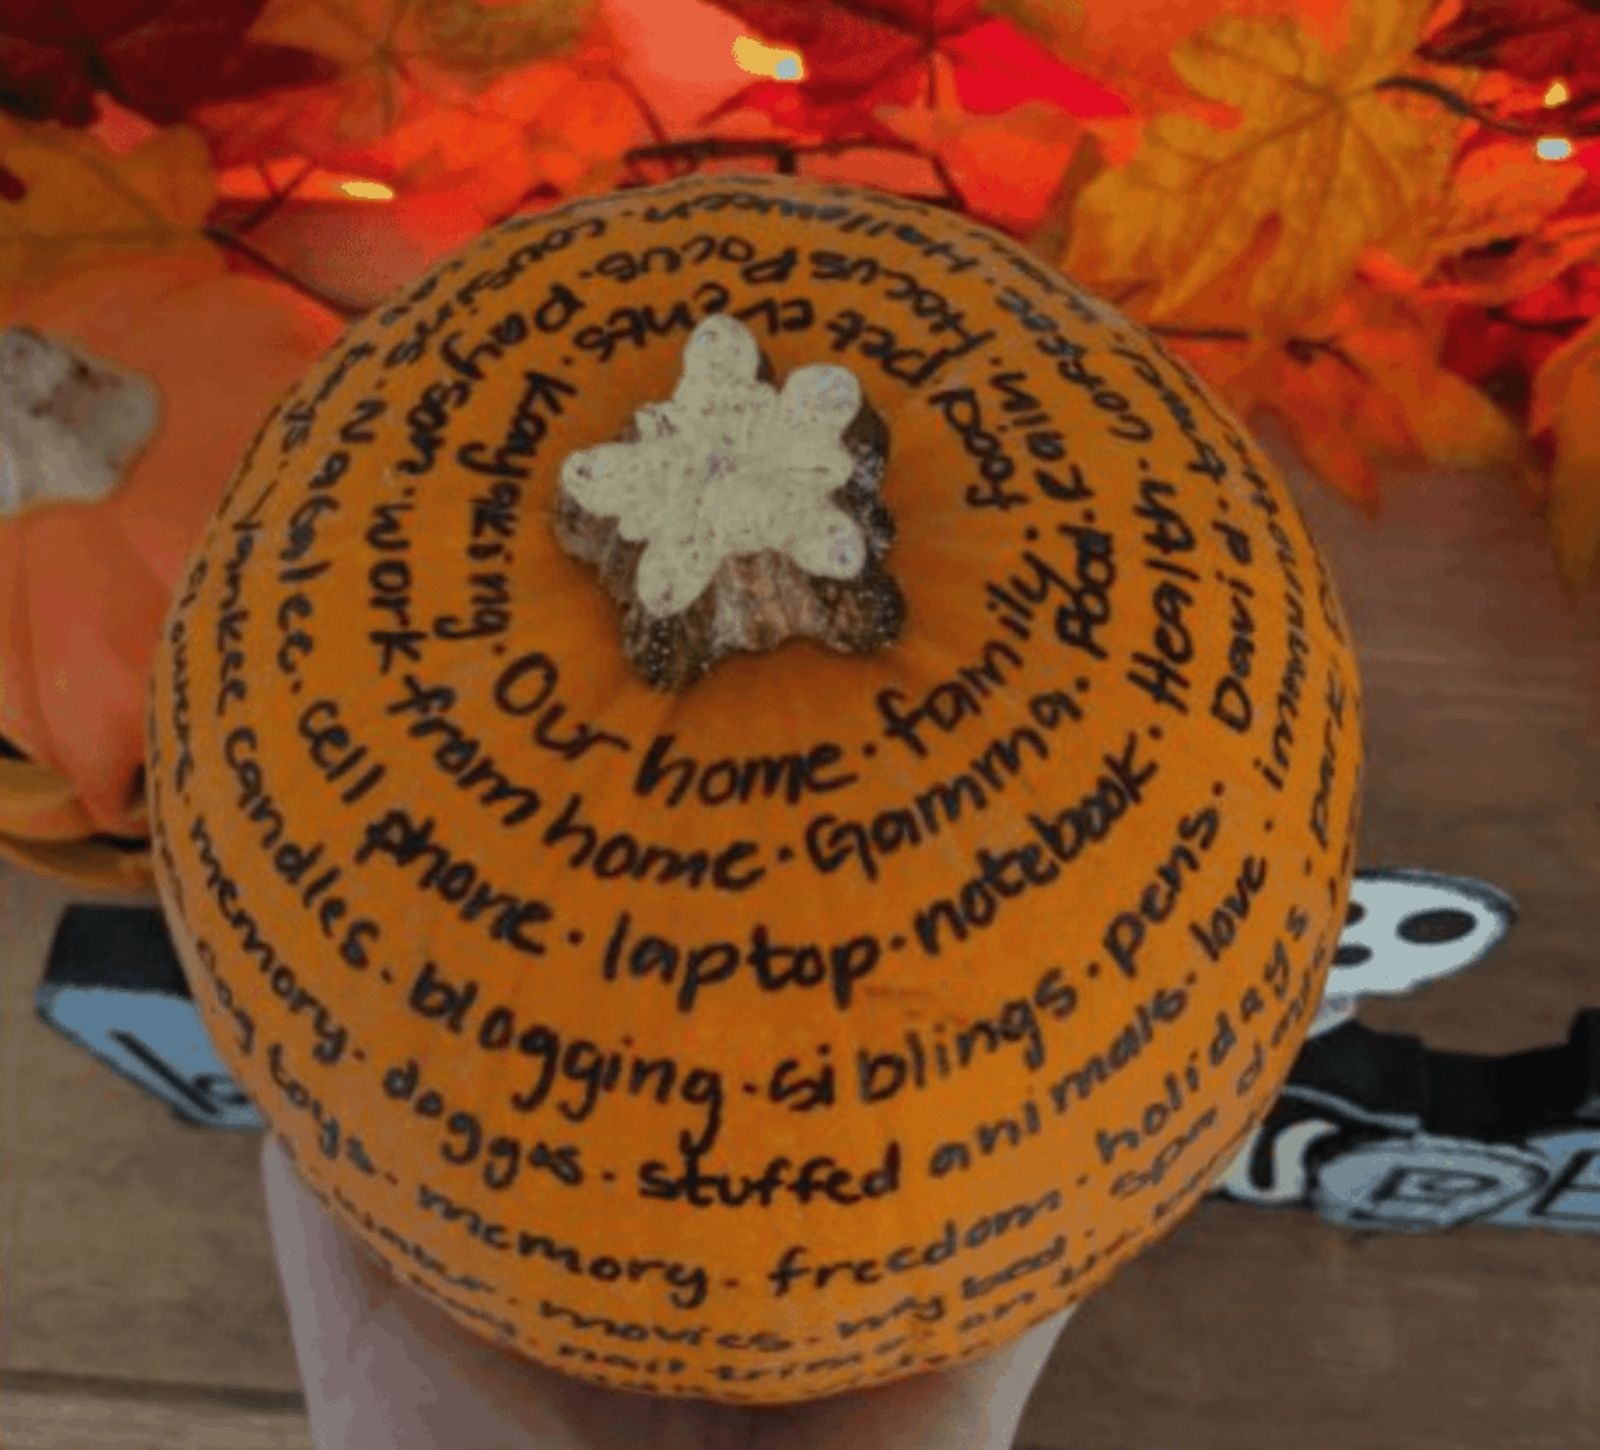 Kitchen Table CEOs Blog - Gratitude pumpkins by tracy smith - fall activity - picture of pumpkin with gratitude words on it.